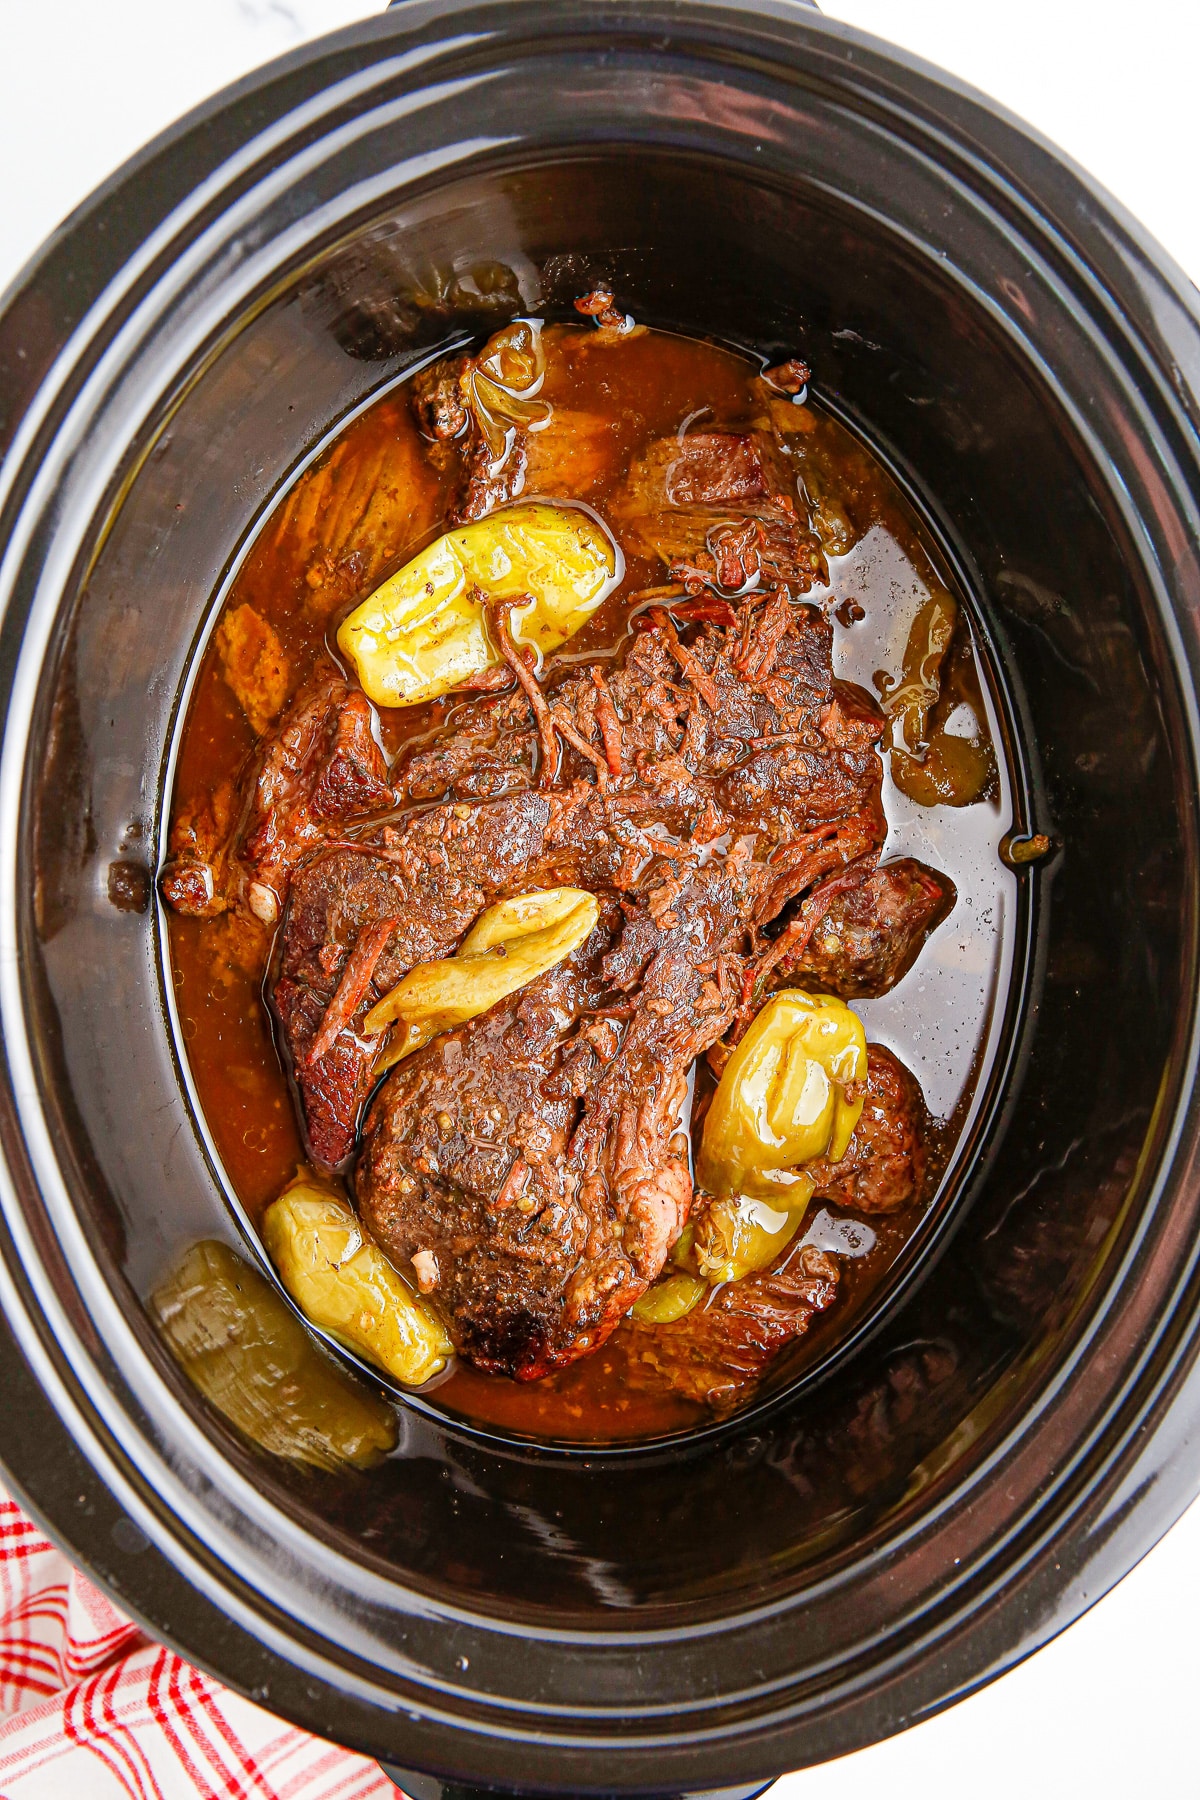 A crock pot full of a large piece of mississippi pot roast chuck roast after cooking sitting in juice topped with pepperoncini peppers.